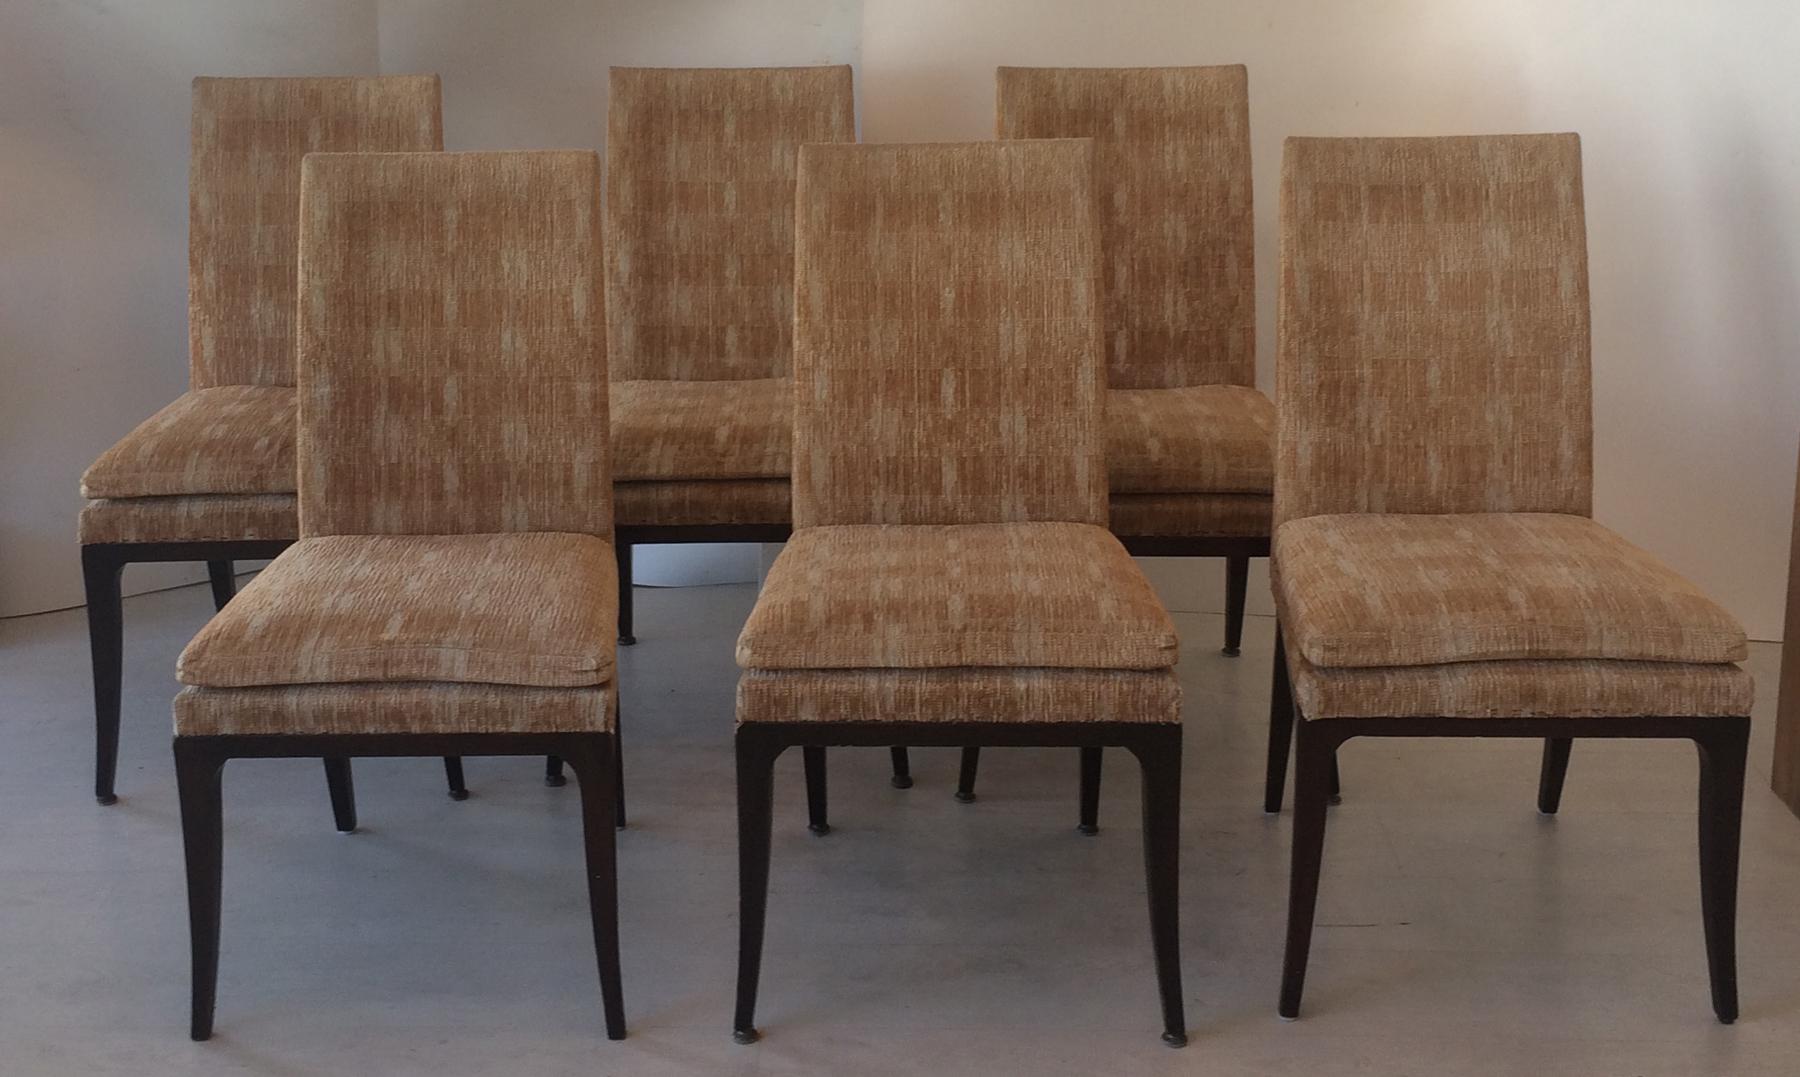 Mahogany frames with original upholstery. Elegantly styled chairs will work with many different decors. Very well made solid wood construction some wear to original fabric.